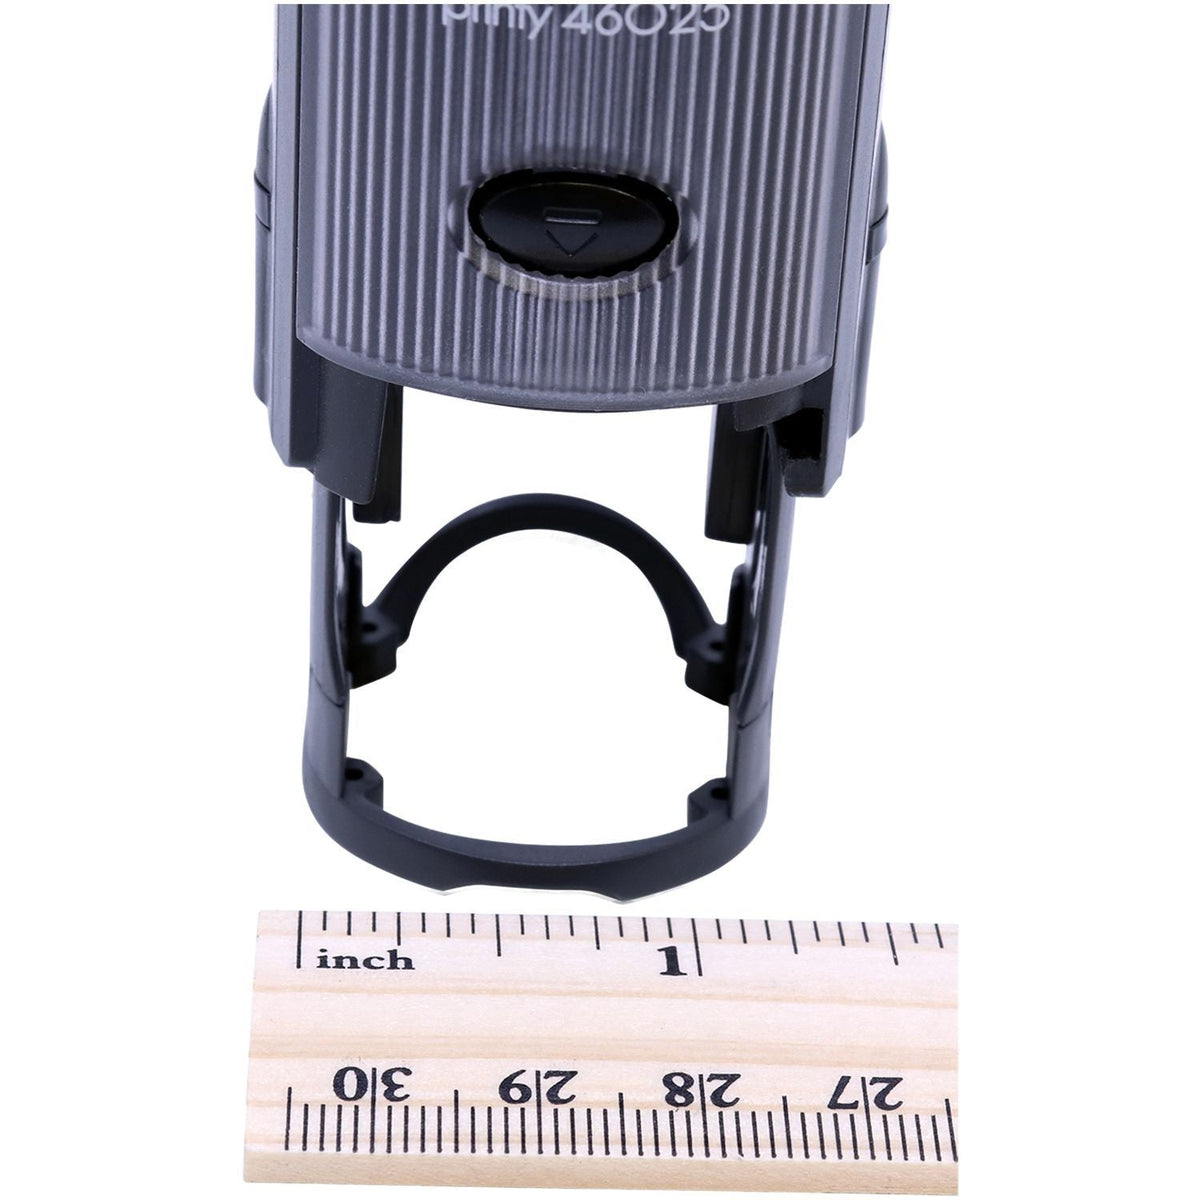 Measurment of Self-Inking Round Smiley Stamp with Ruler